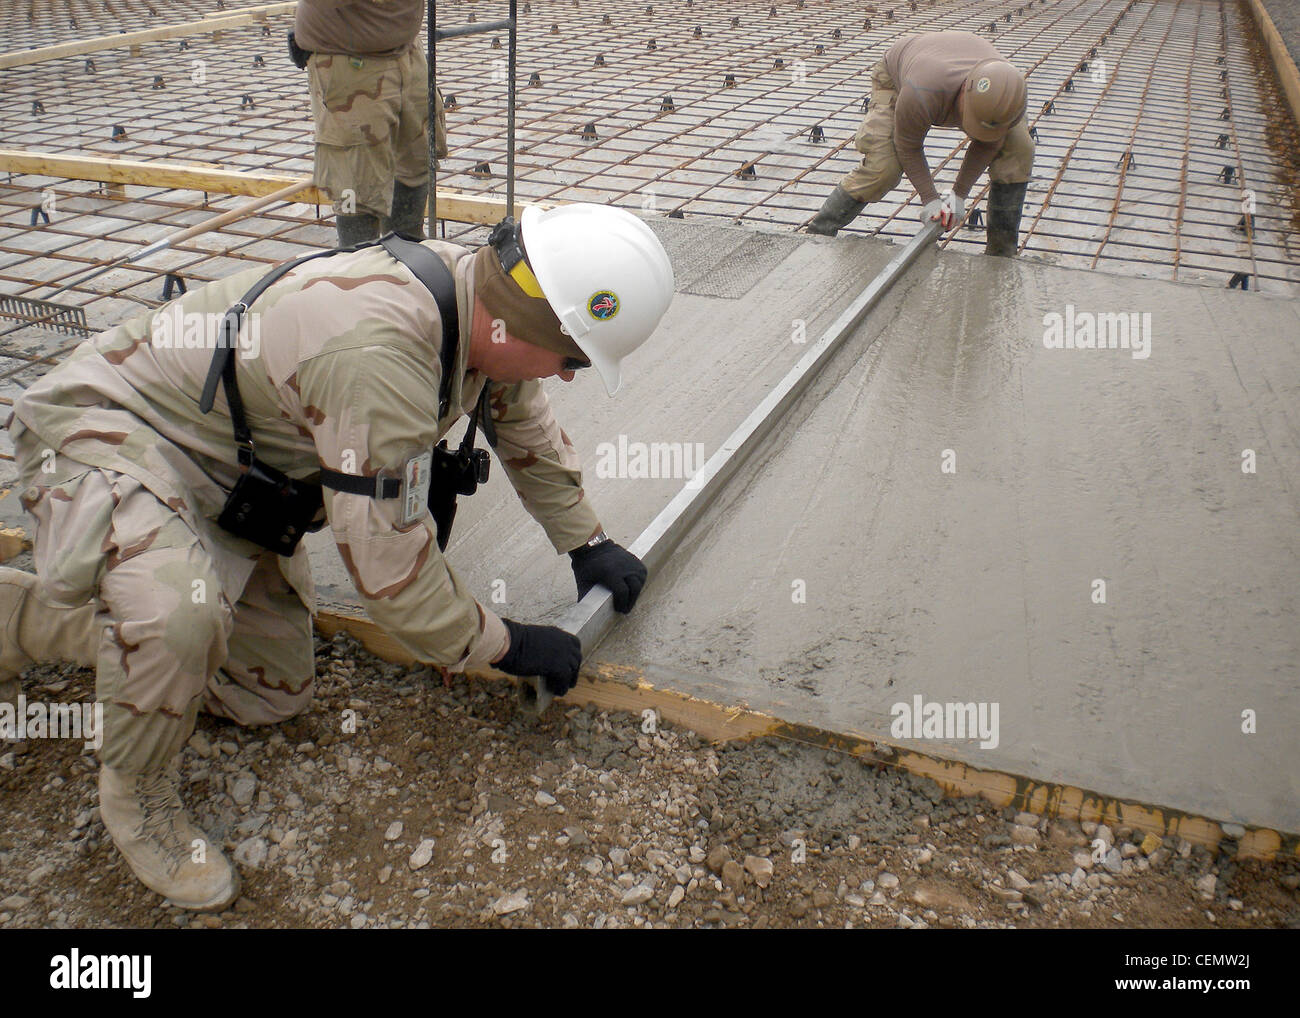 KANDAHAR PROVINCE, Afghanistan (Feb. 4, 2012) Senior Chief Builder Robert Morrison, left, and Builder 3rd Class Nathaniel Callaham, assigned to Detachment PASAB of Naval Mobile Construction Battalion (NMCB) 7, level concrete with a metal screed during the placement of concrete pads at Forward Operating Base PASAB. NMCB-7 and its detachments are one of two Seabee battalions supporting the International Security Assistance Force as part of Task Force Stethem in the U.S. Central Command area of responsibility Stock Photo